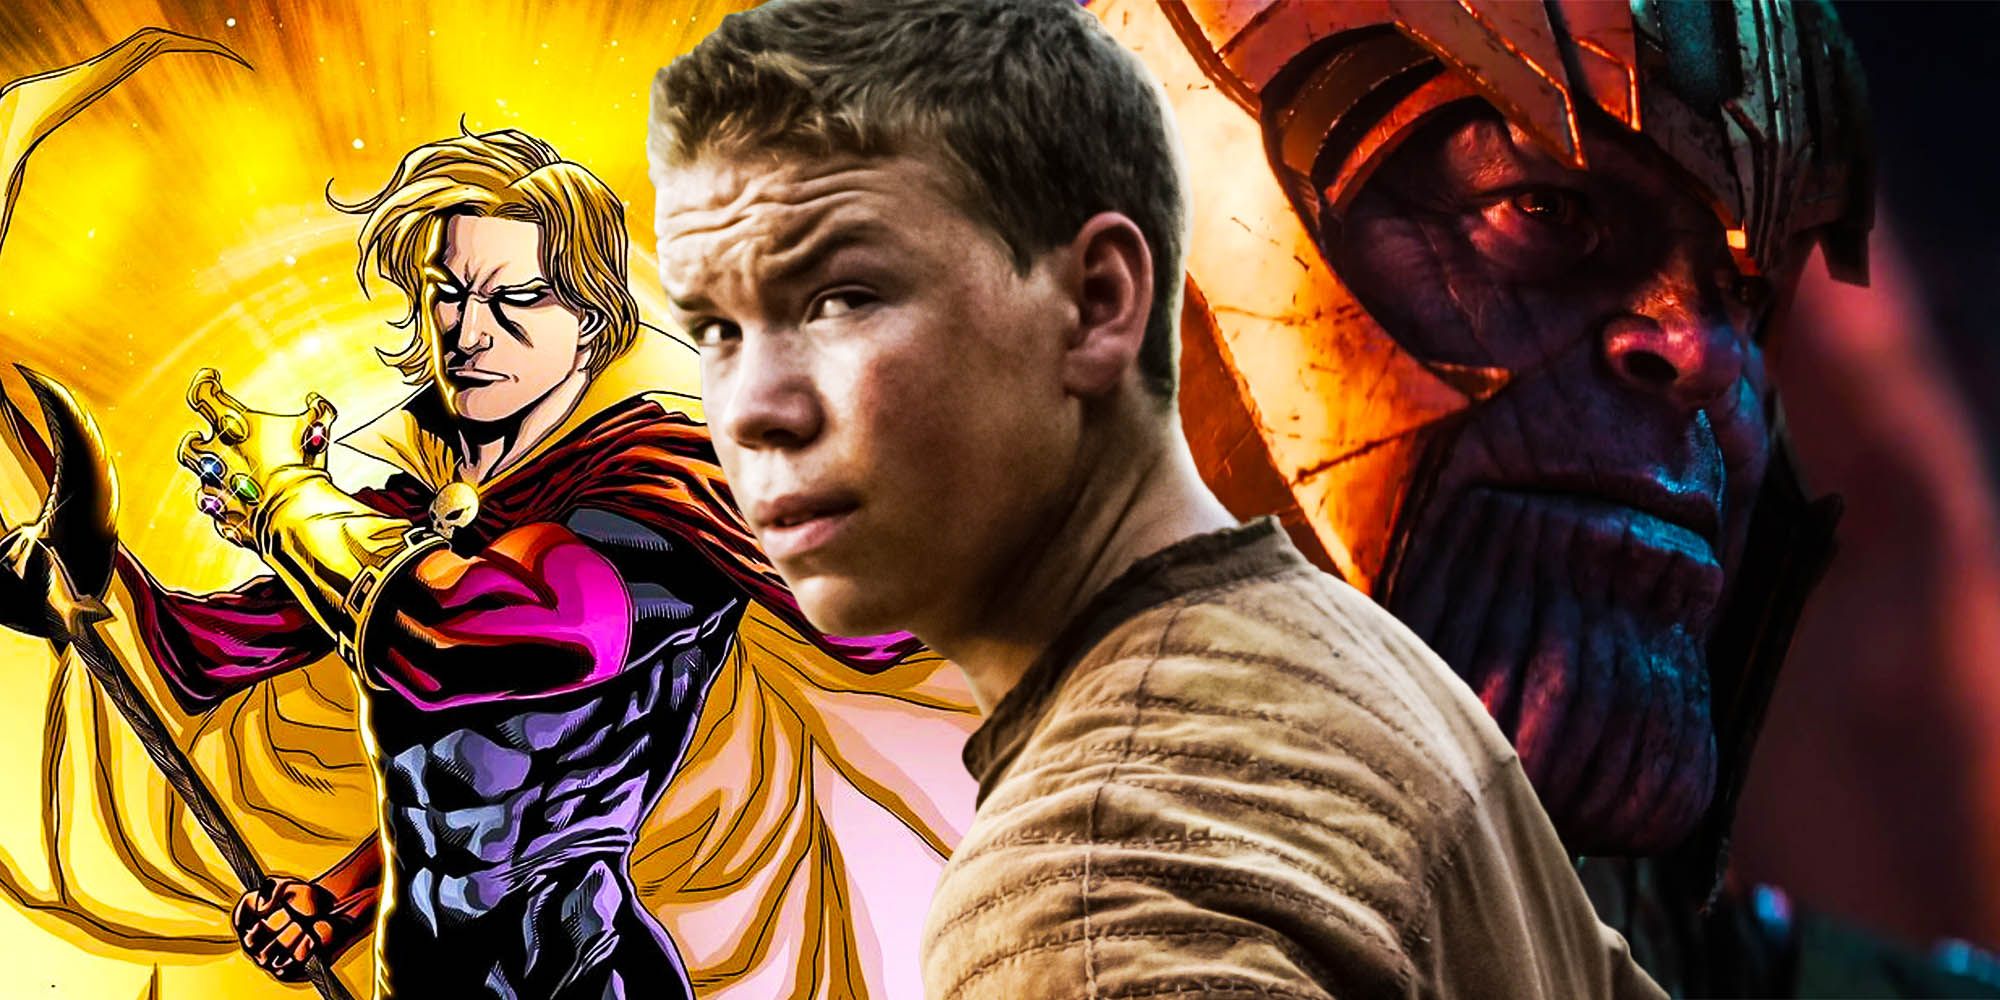 Will Poulter how Adam Warlock story can work without thanos or infinity stones